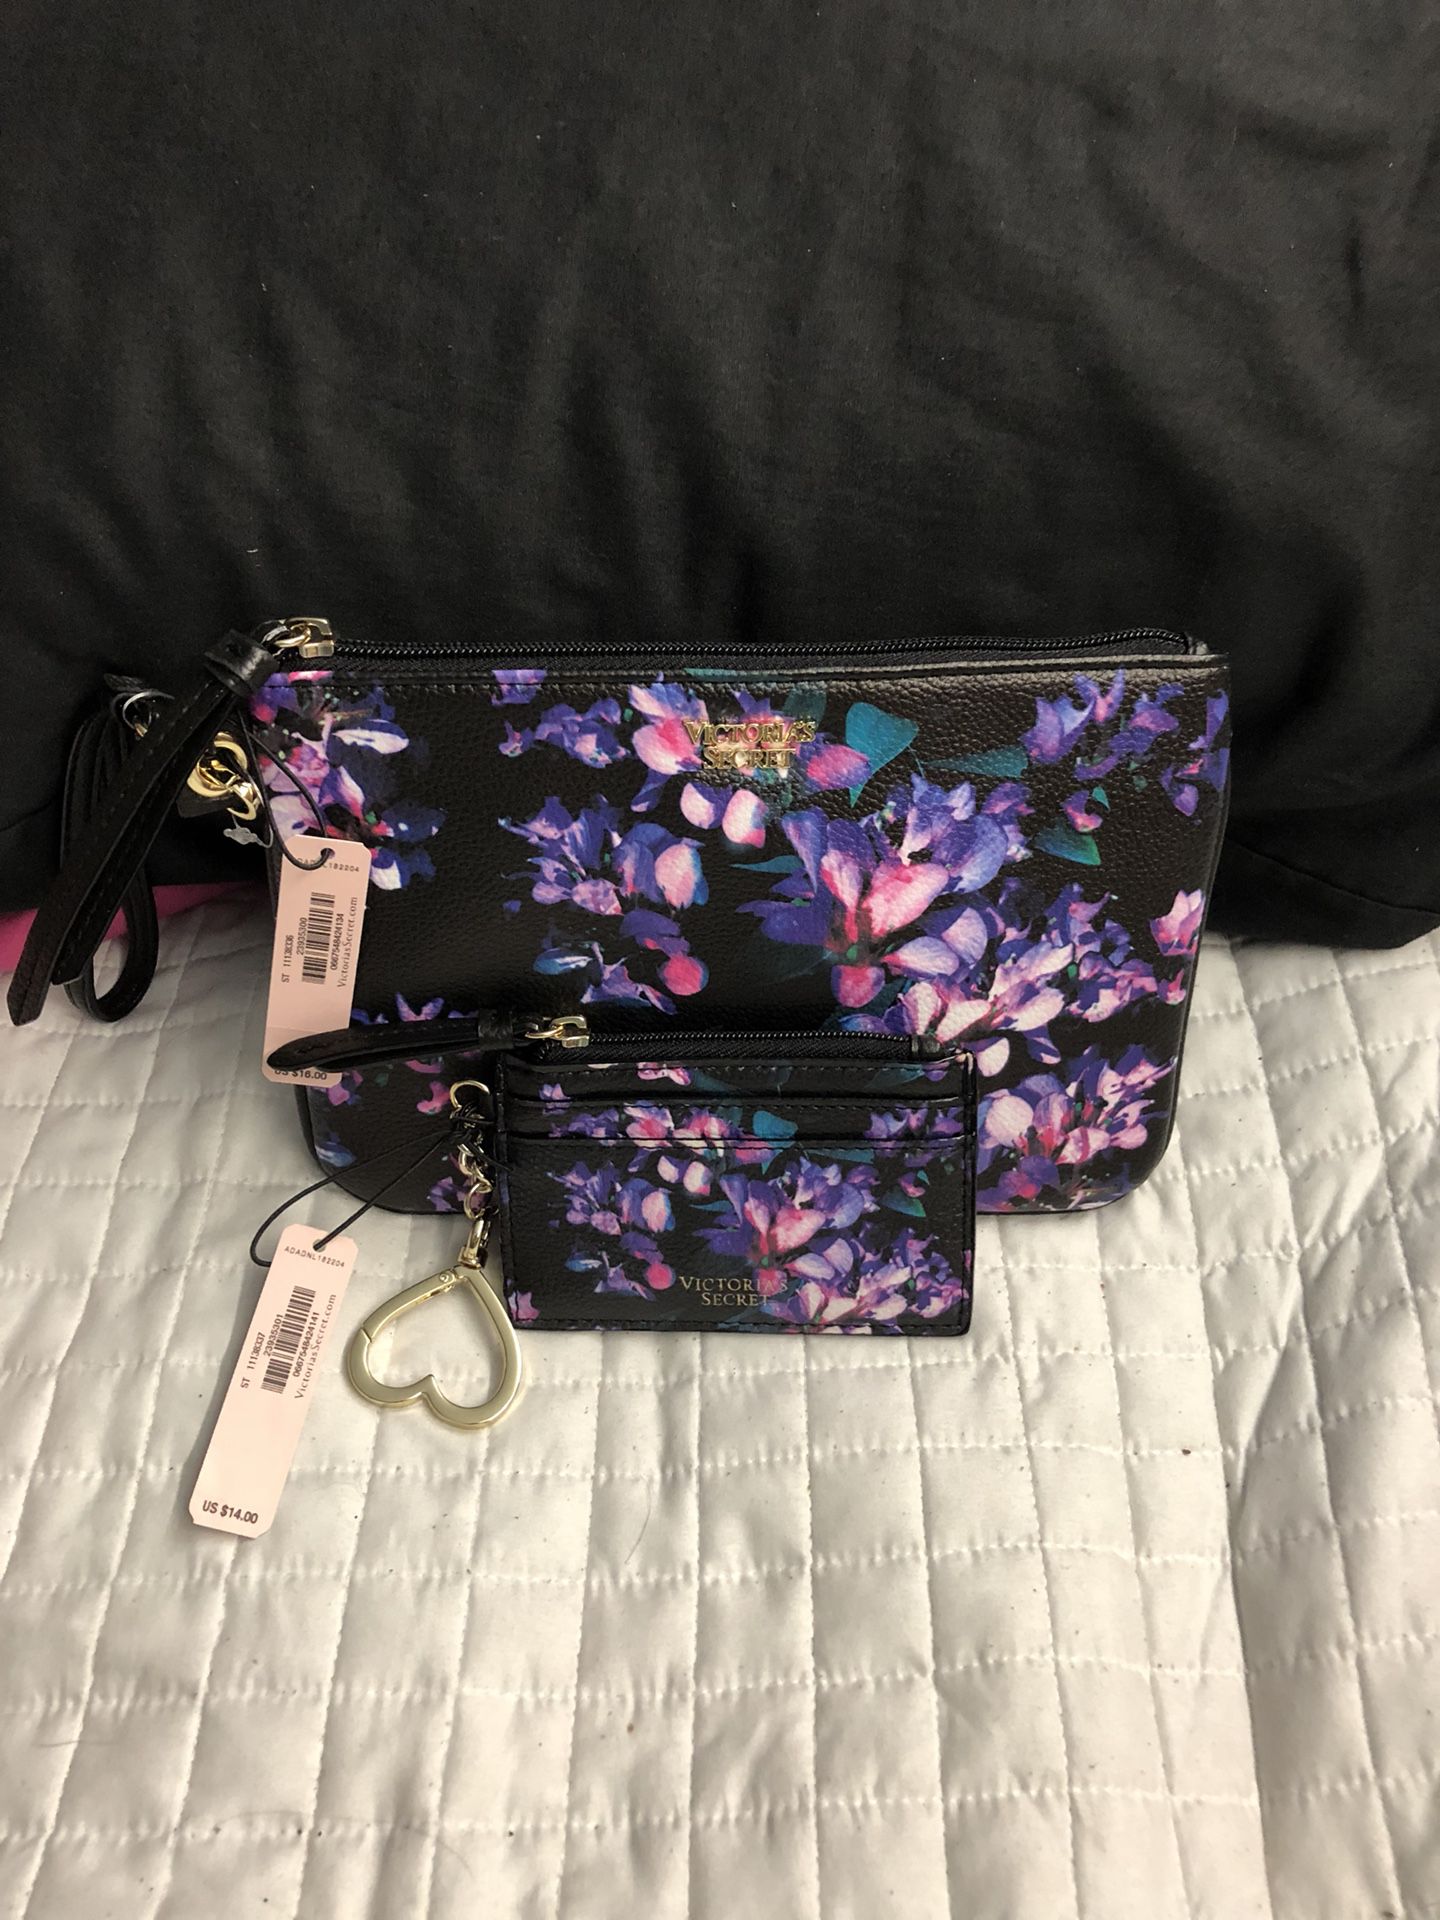 Gorgeous Victoria’s Secret clutch and ID keychain